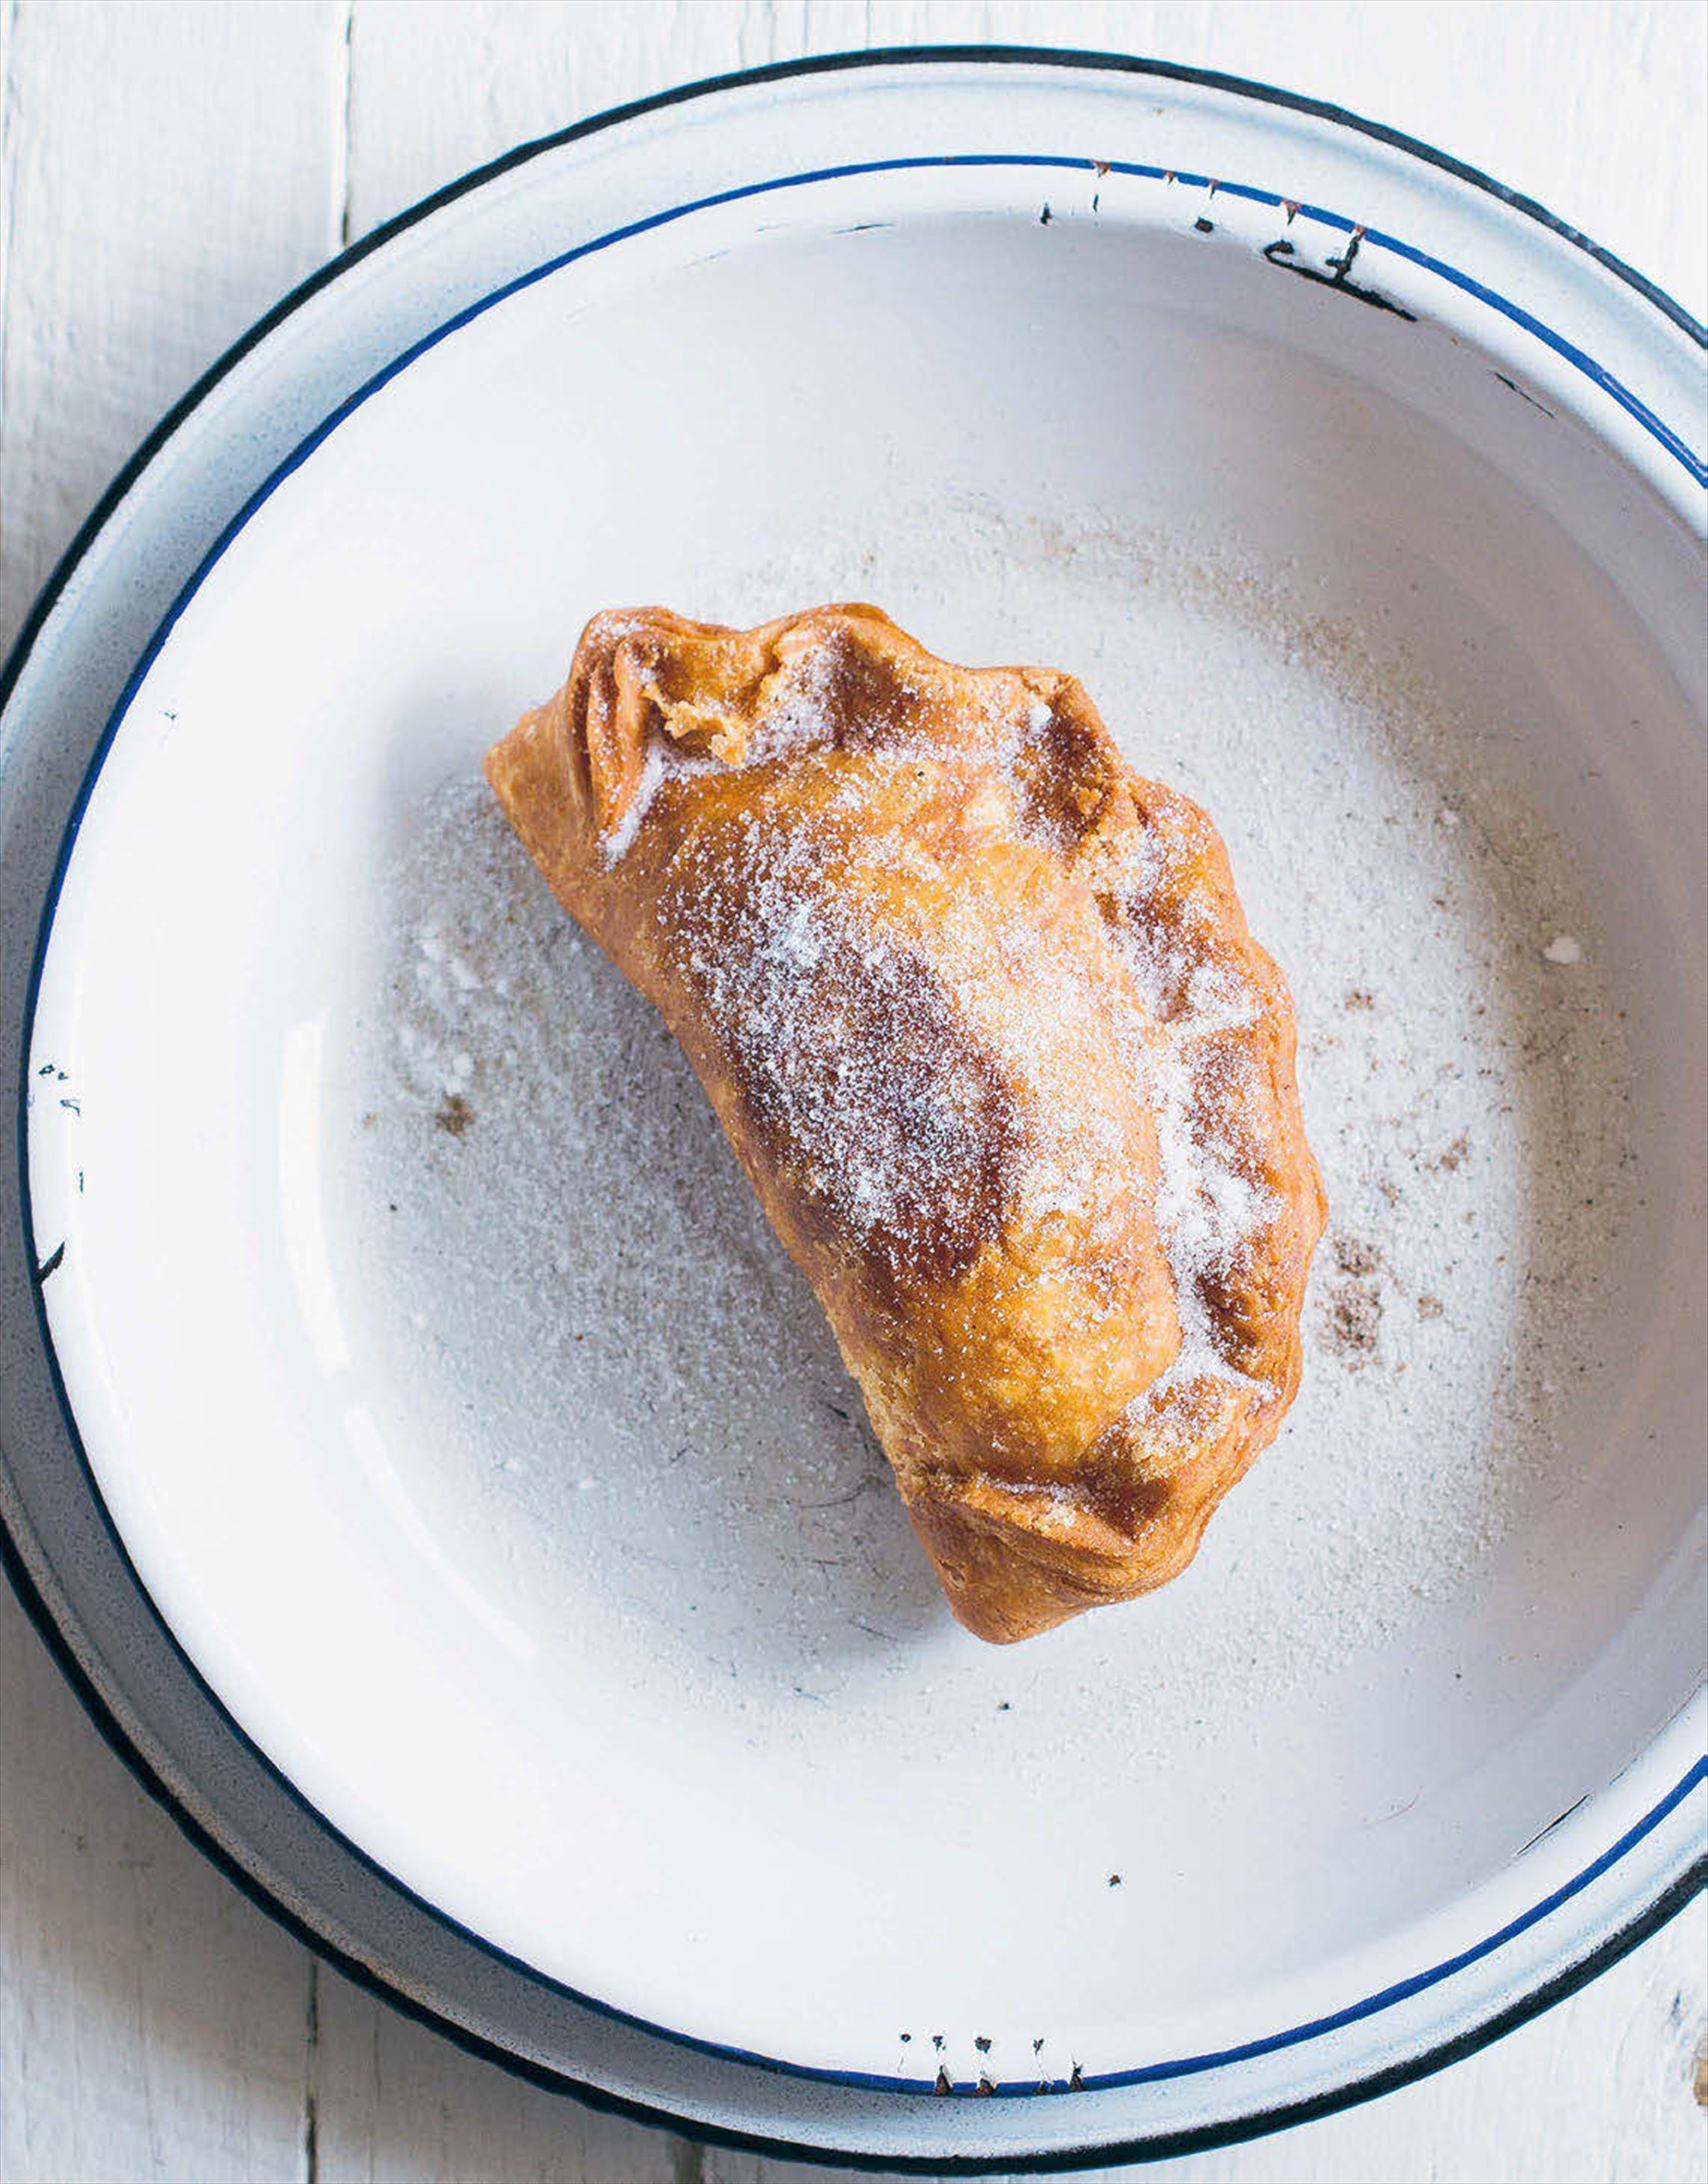 Fried apricot and cardamom sugar handpies